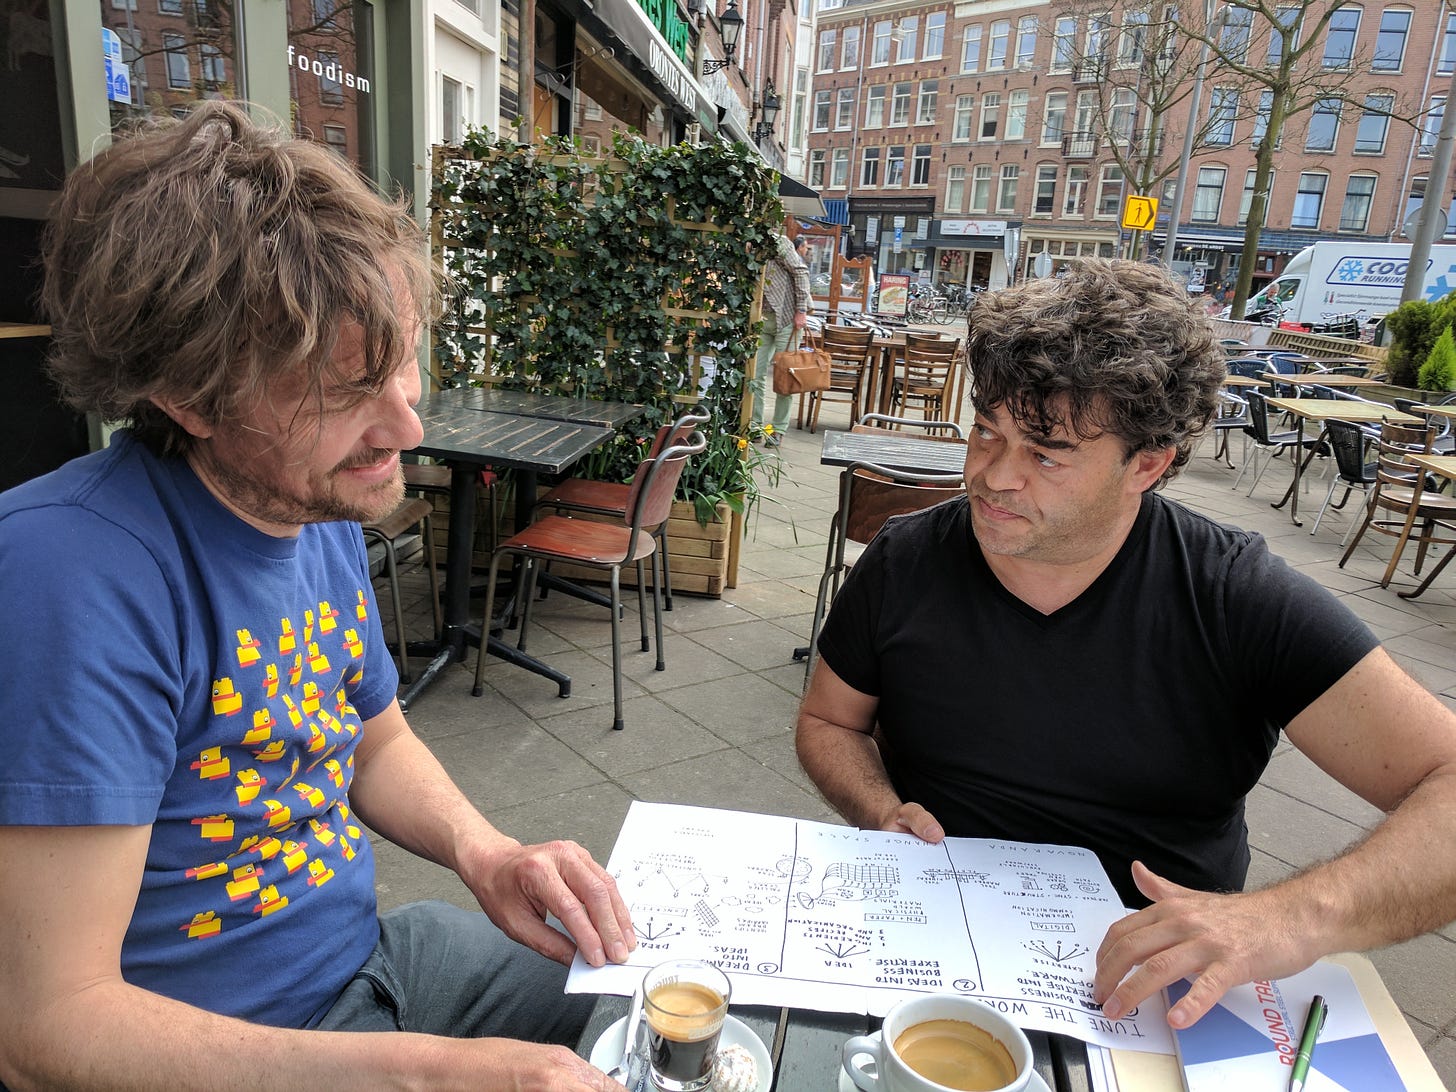 Two guys at an outdoor cafe reviewing a diagram